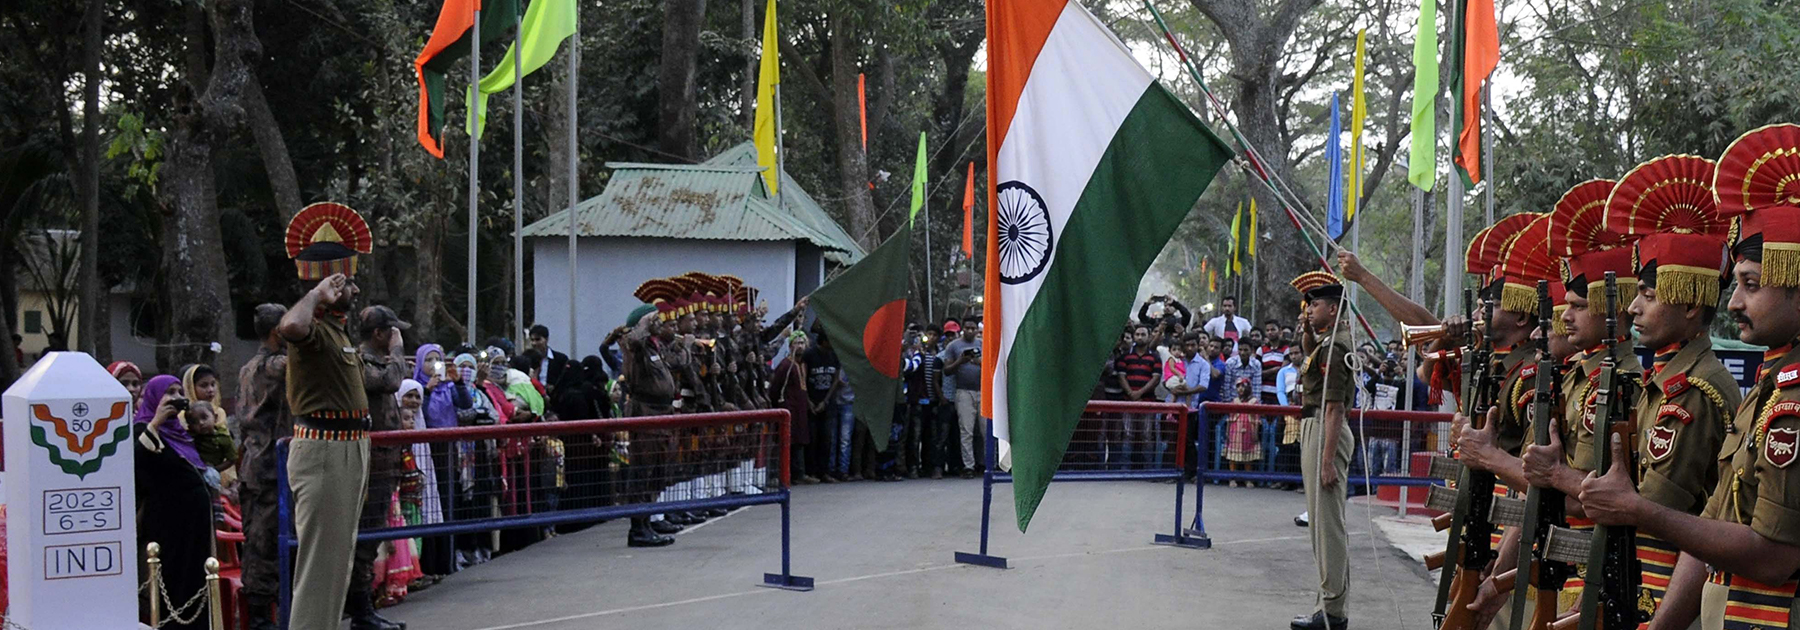 Indian Border Security Force (BSF) personnel during the Beating Retreat ceremony on the India Bangladesh border at Akhaura Integrated Checkpost in Agartala on February 14, 2017. (ARINDAM DEY/AFP/Getty Images)